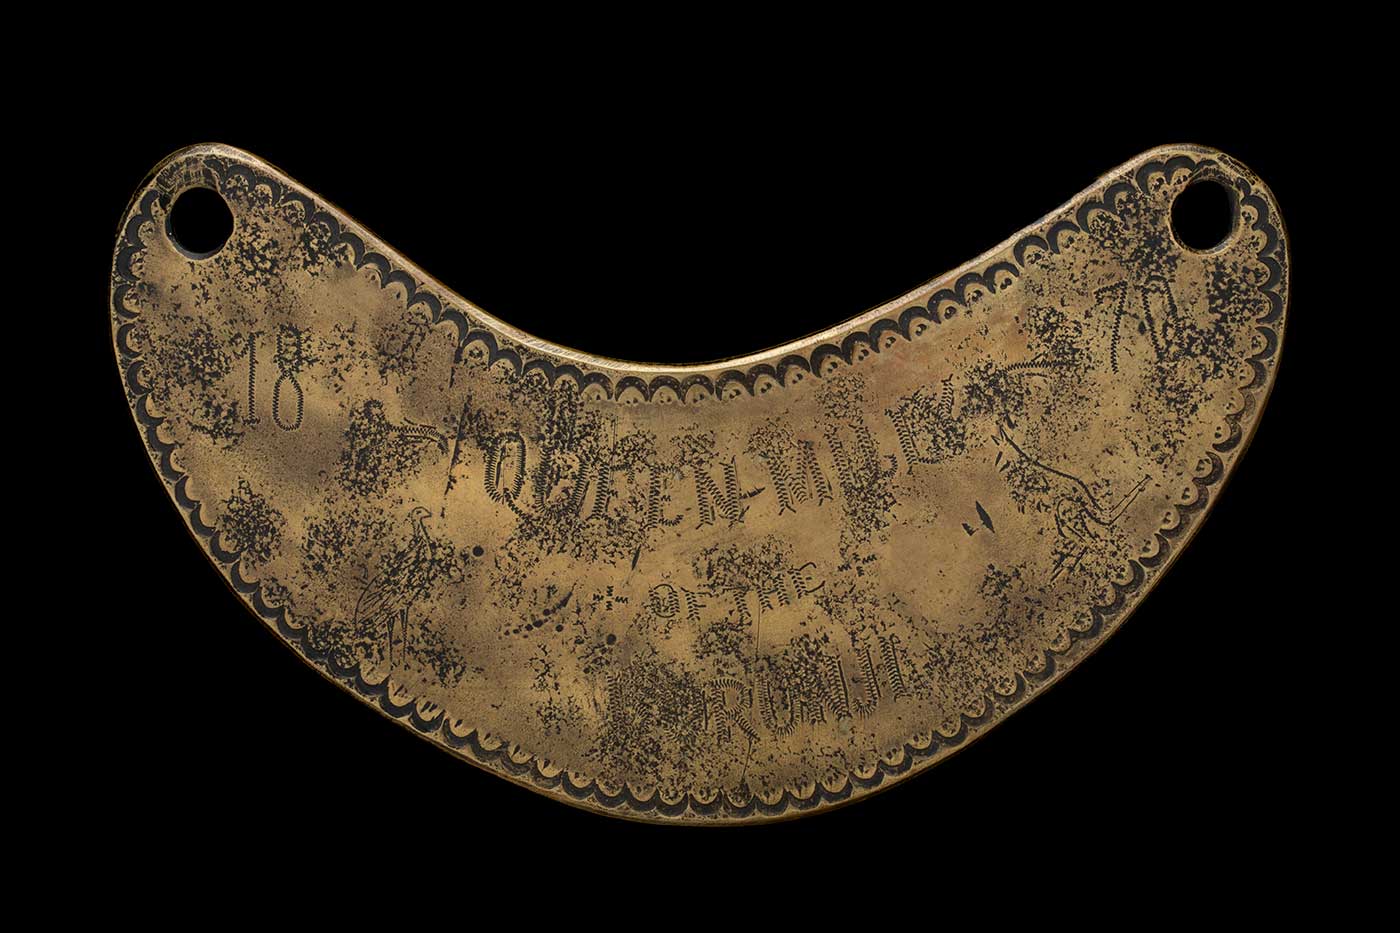 Engraved breastplate with decorative border and a heavily pitted surface. Text '1870' and images of a kangaroo and emu are partially visible. - click to view larger image